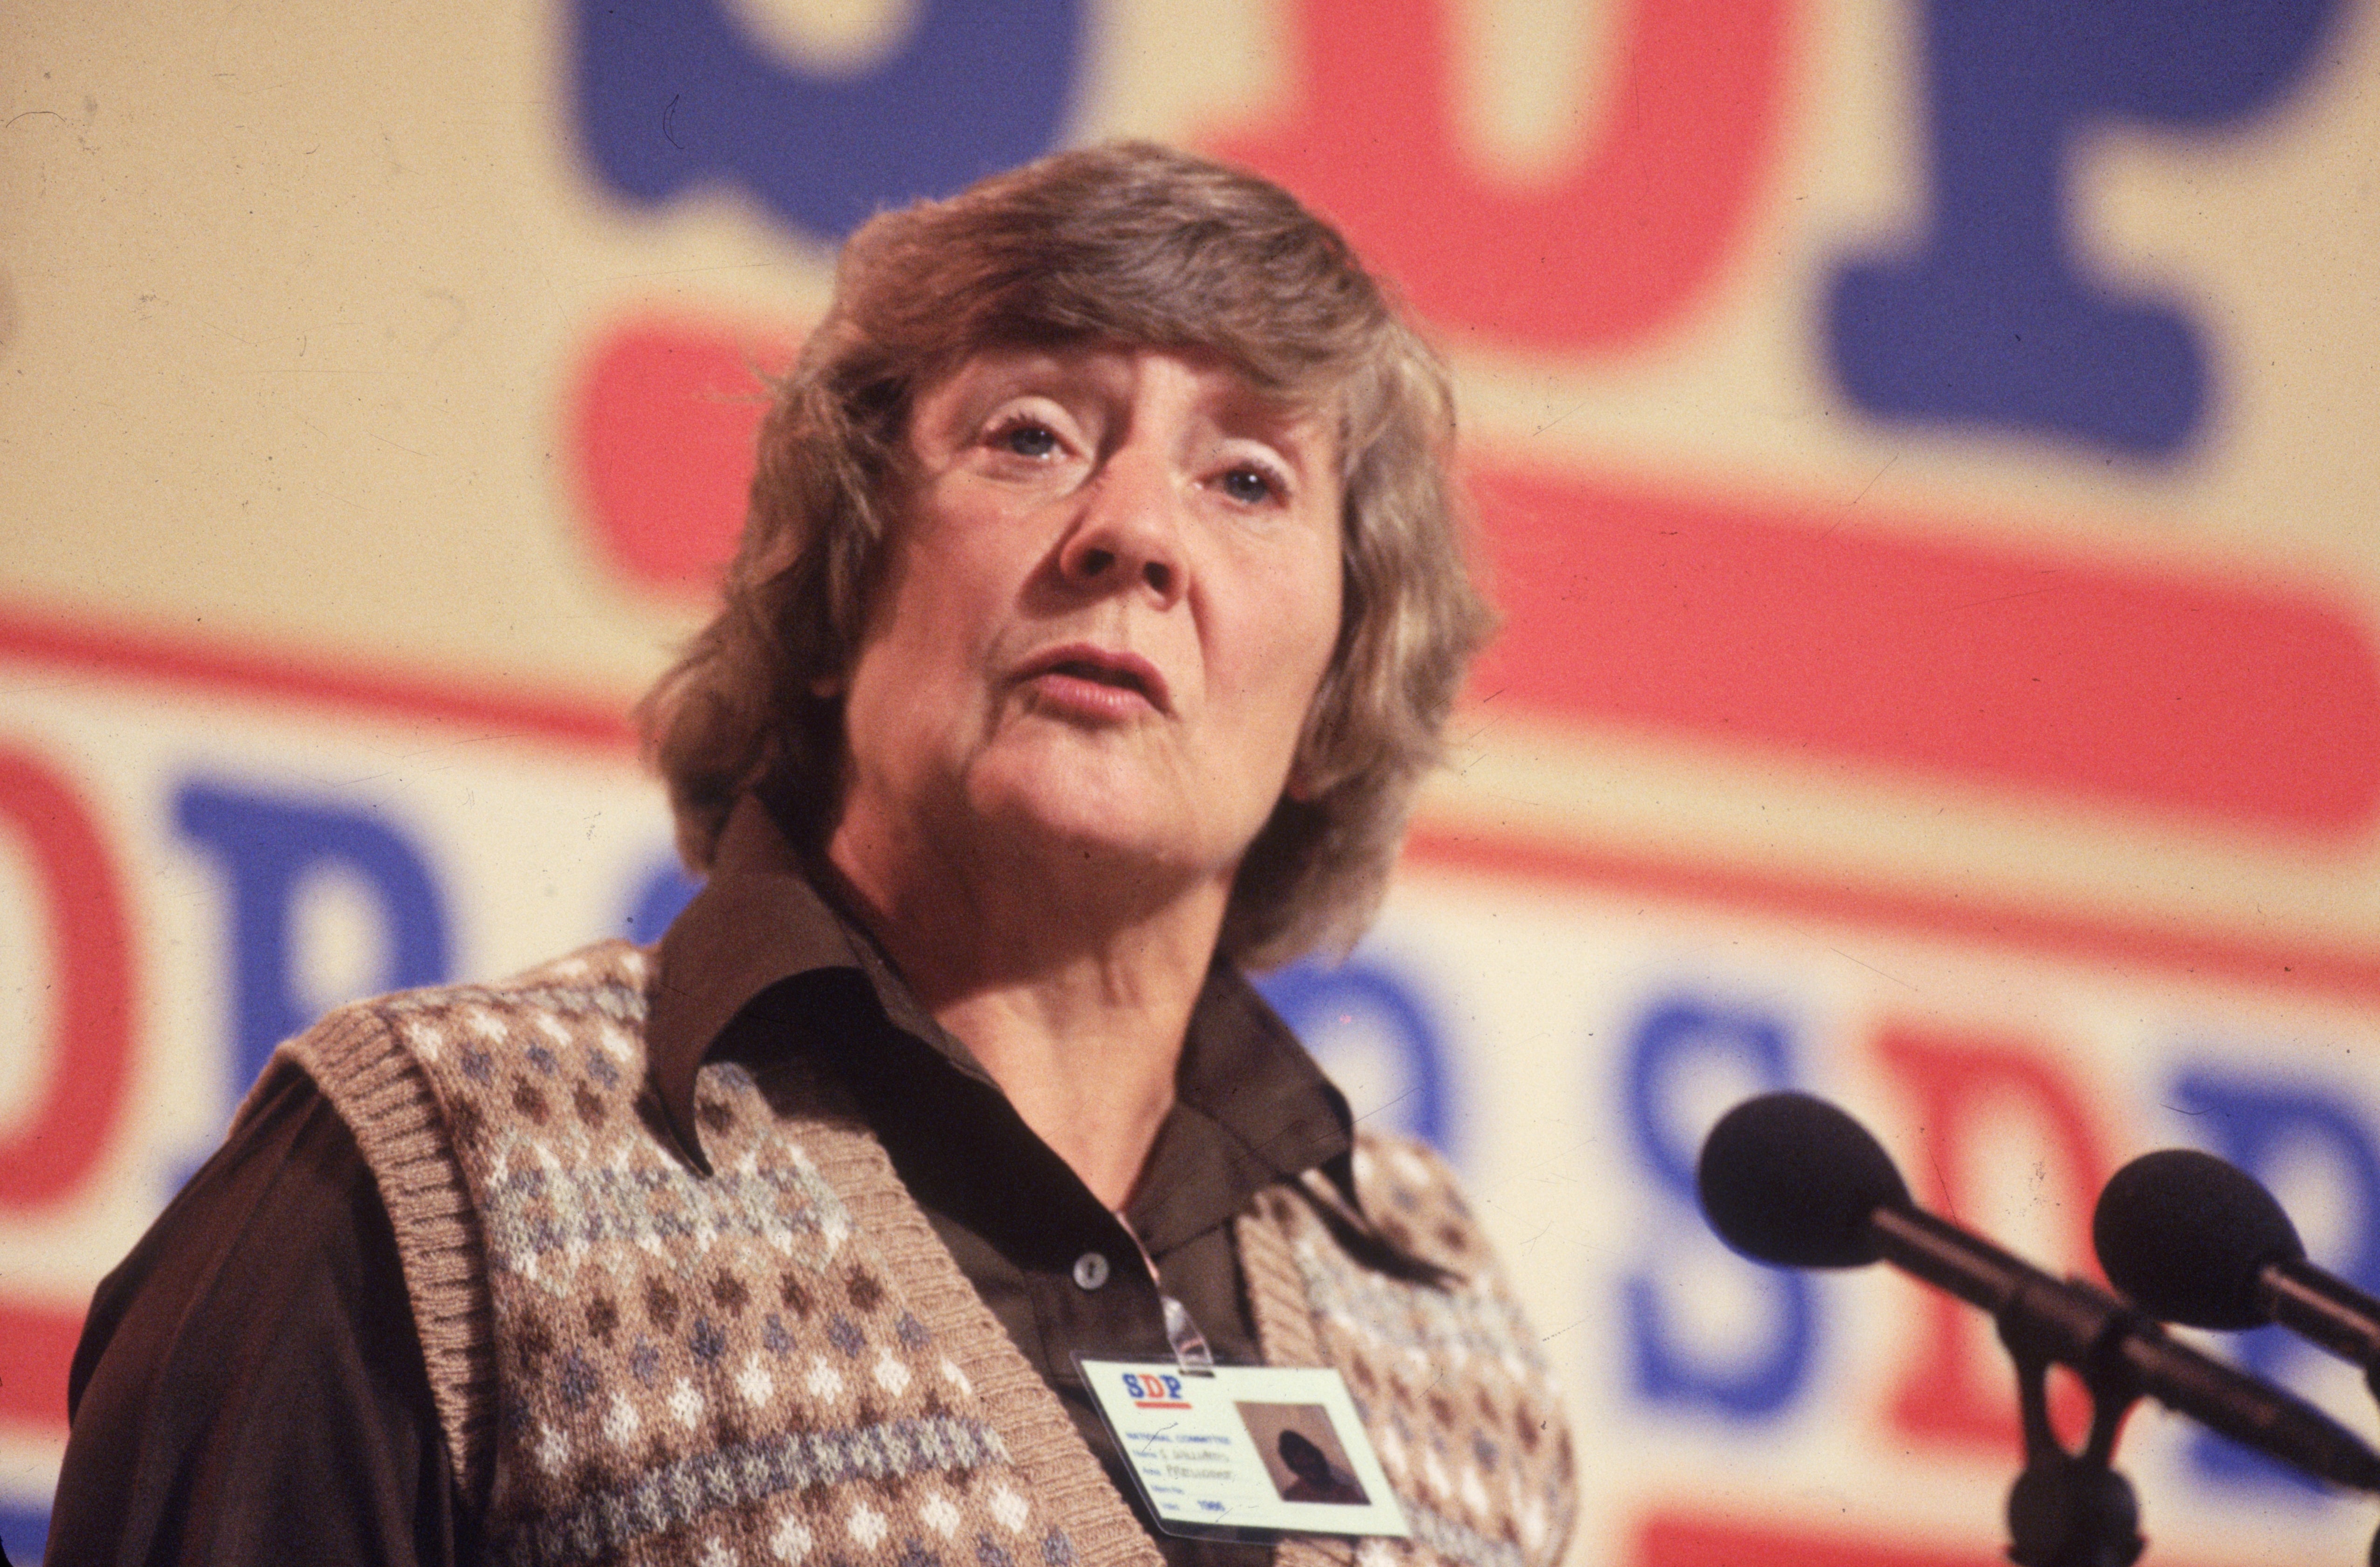 Shirley Williams in 1986. She is described by Tony Blair as ‘one of the greatest social democrats of the last century’